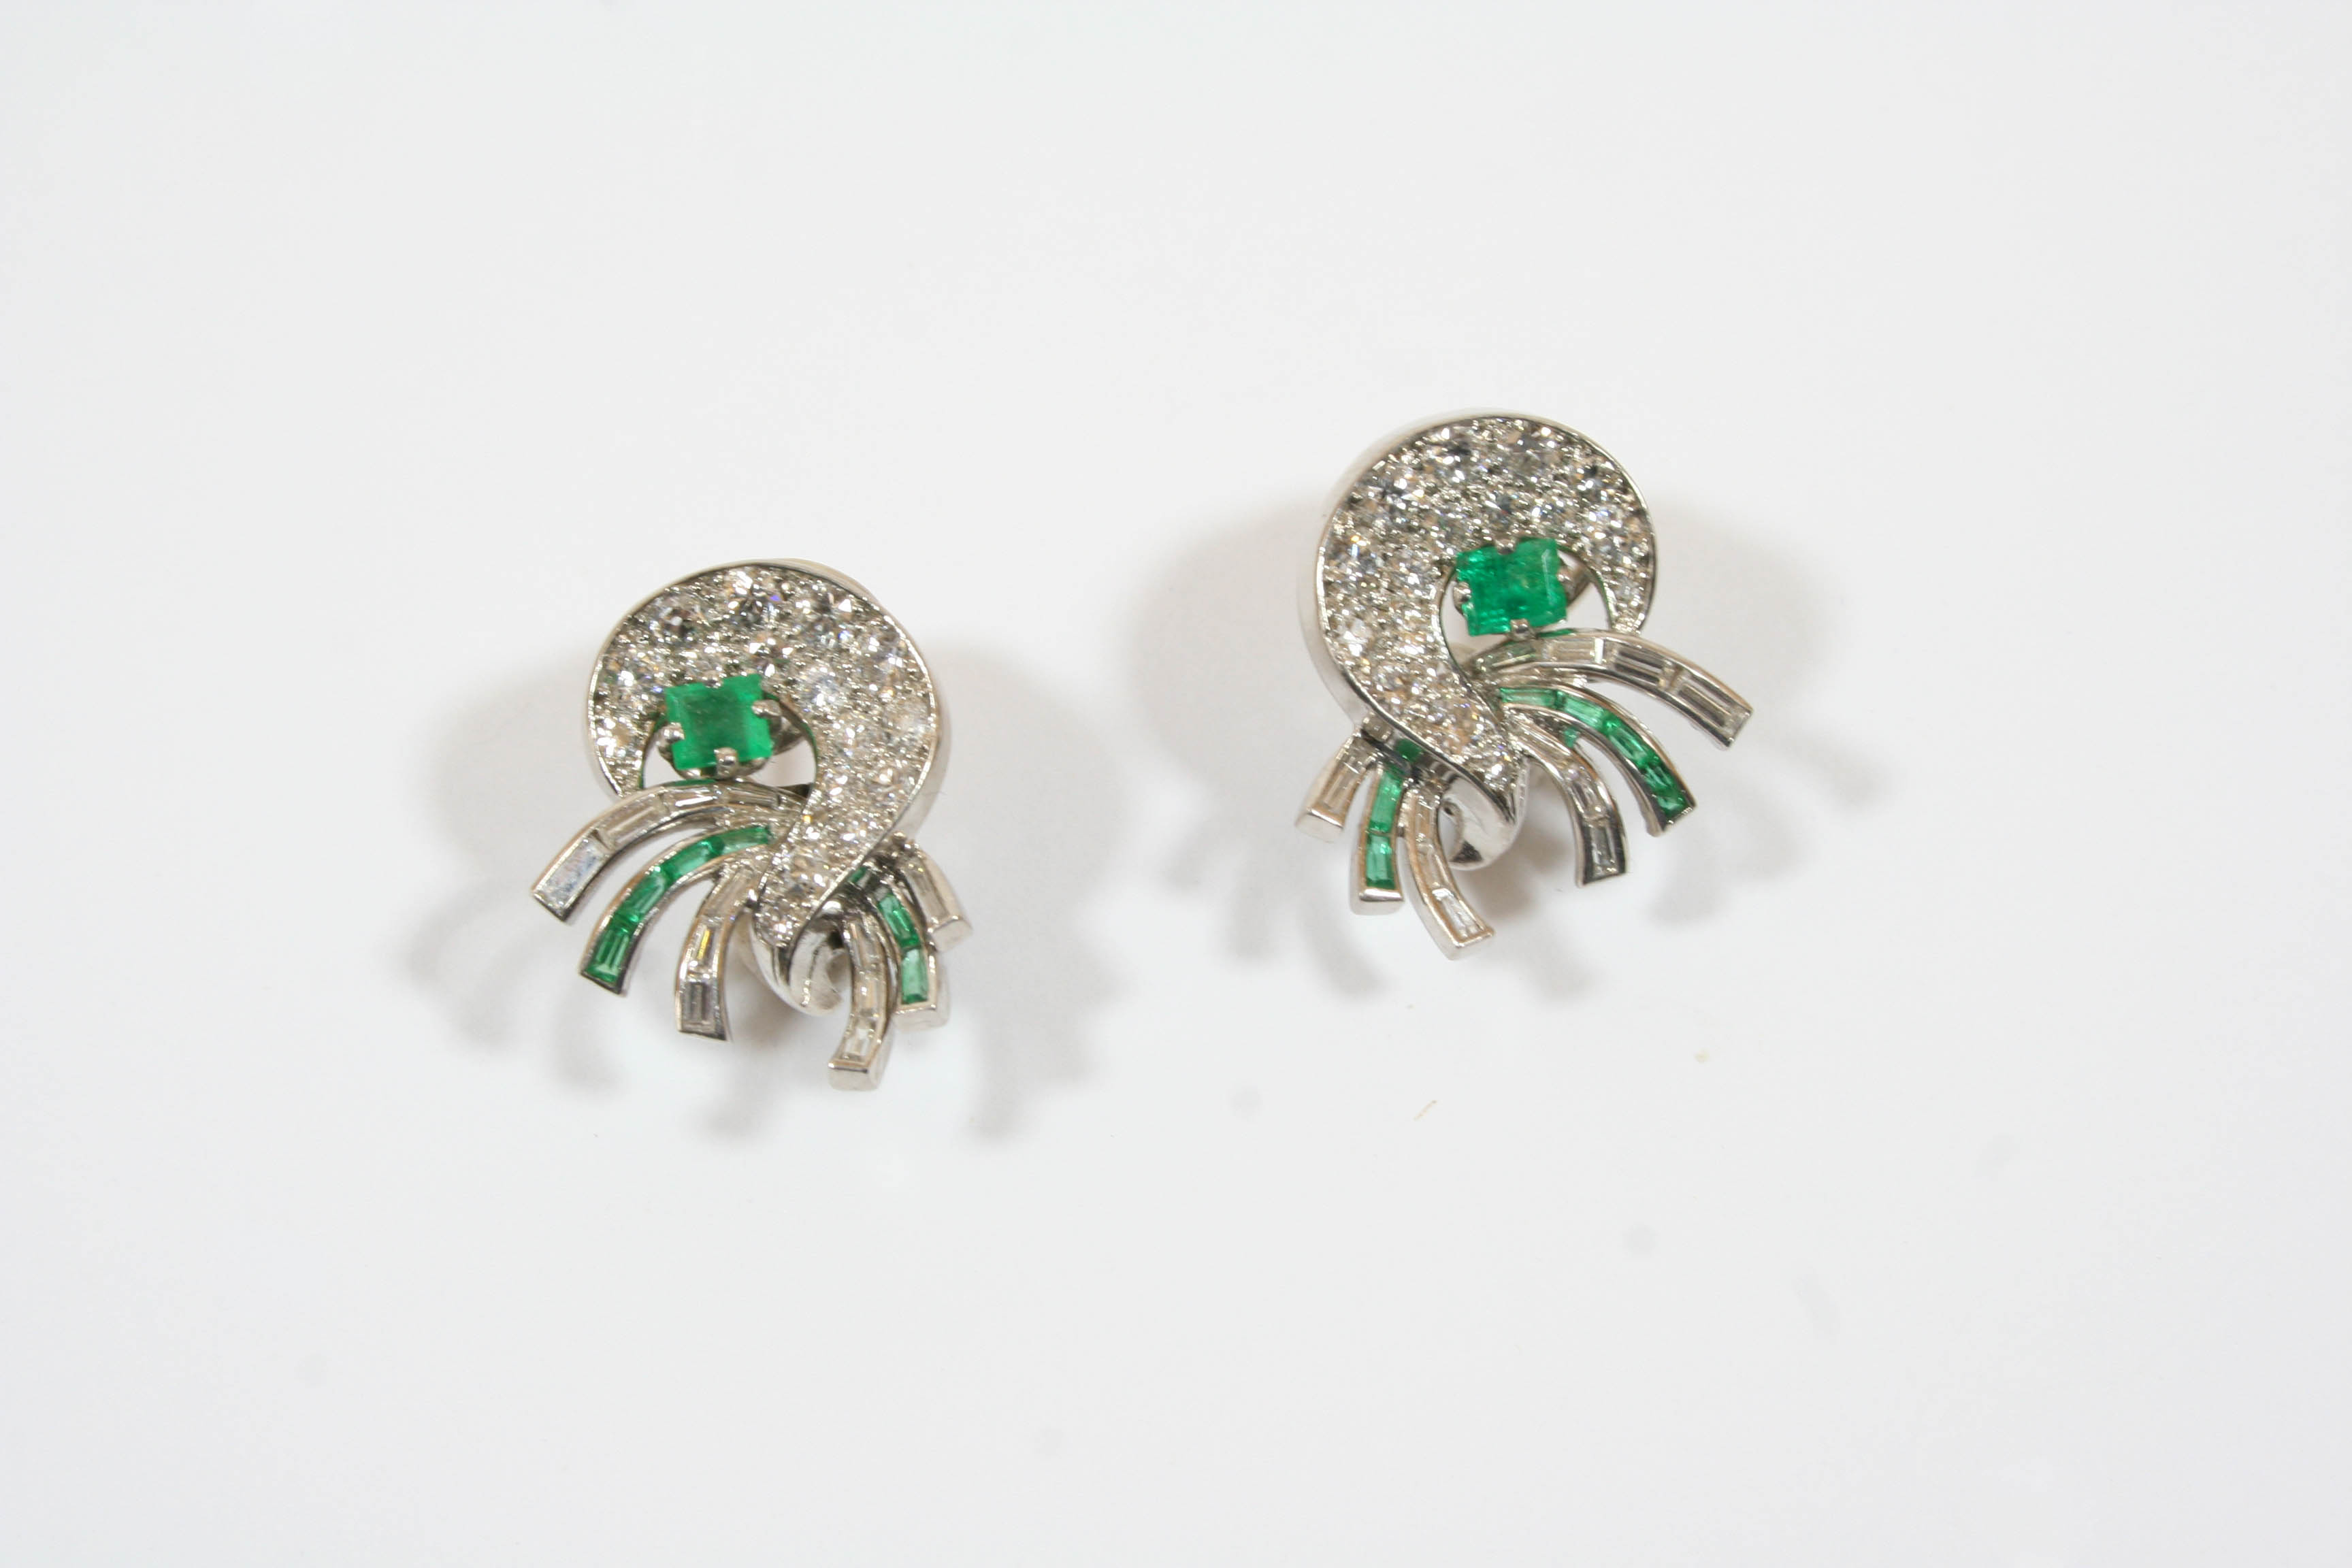 A PAIR OF DIAMOND AND EMERALD EARCLIPS BY J.E. CALDWELL of scrolling design, each mounted with a